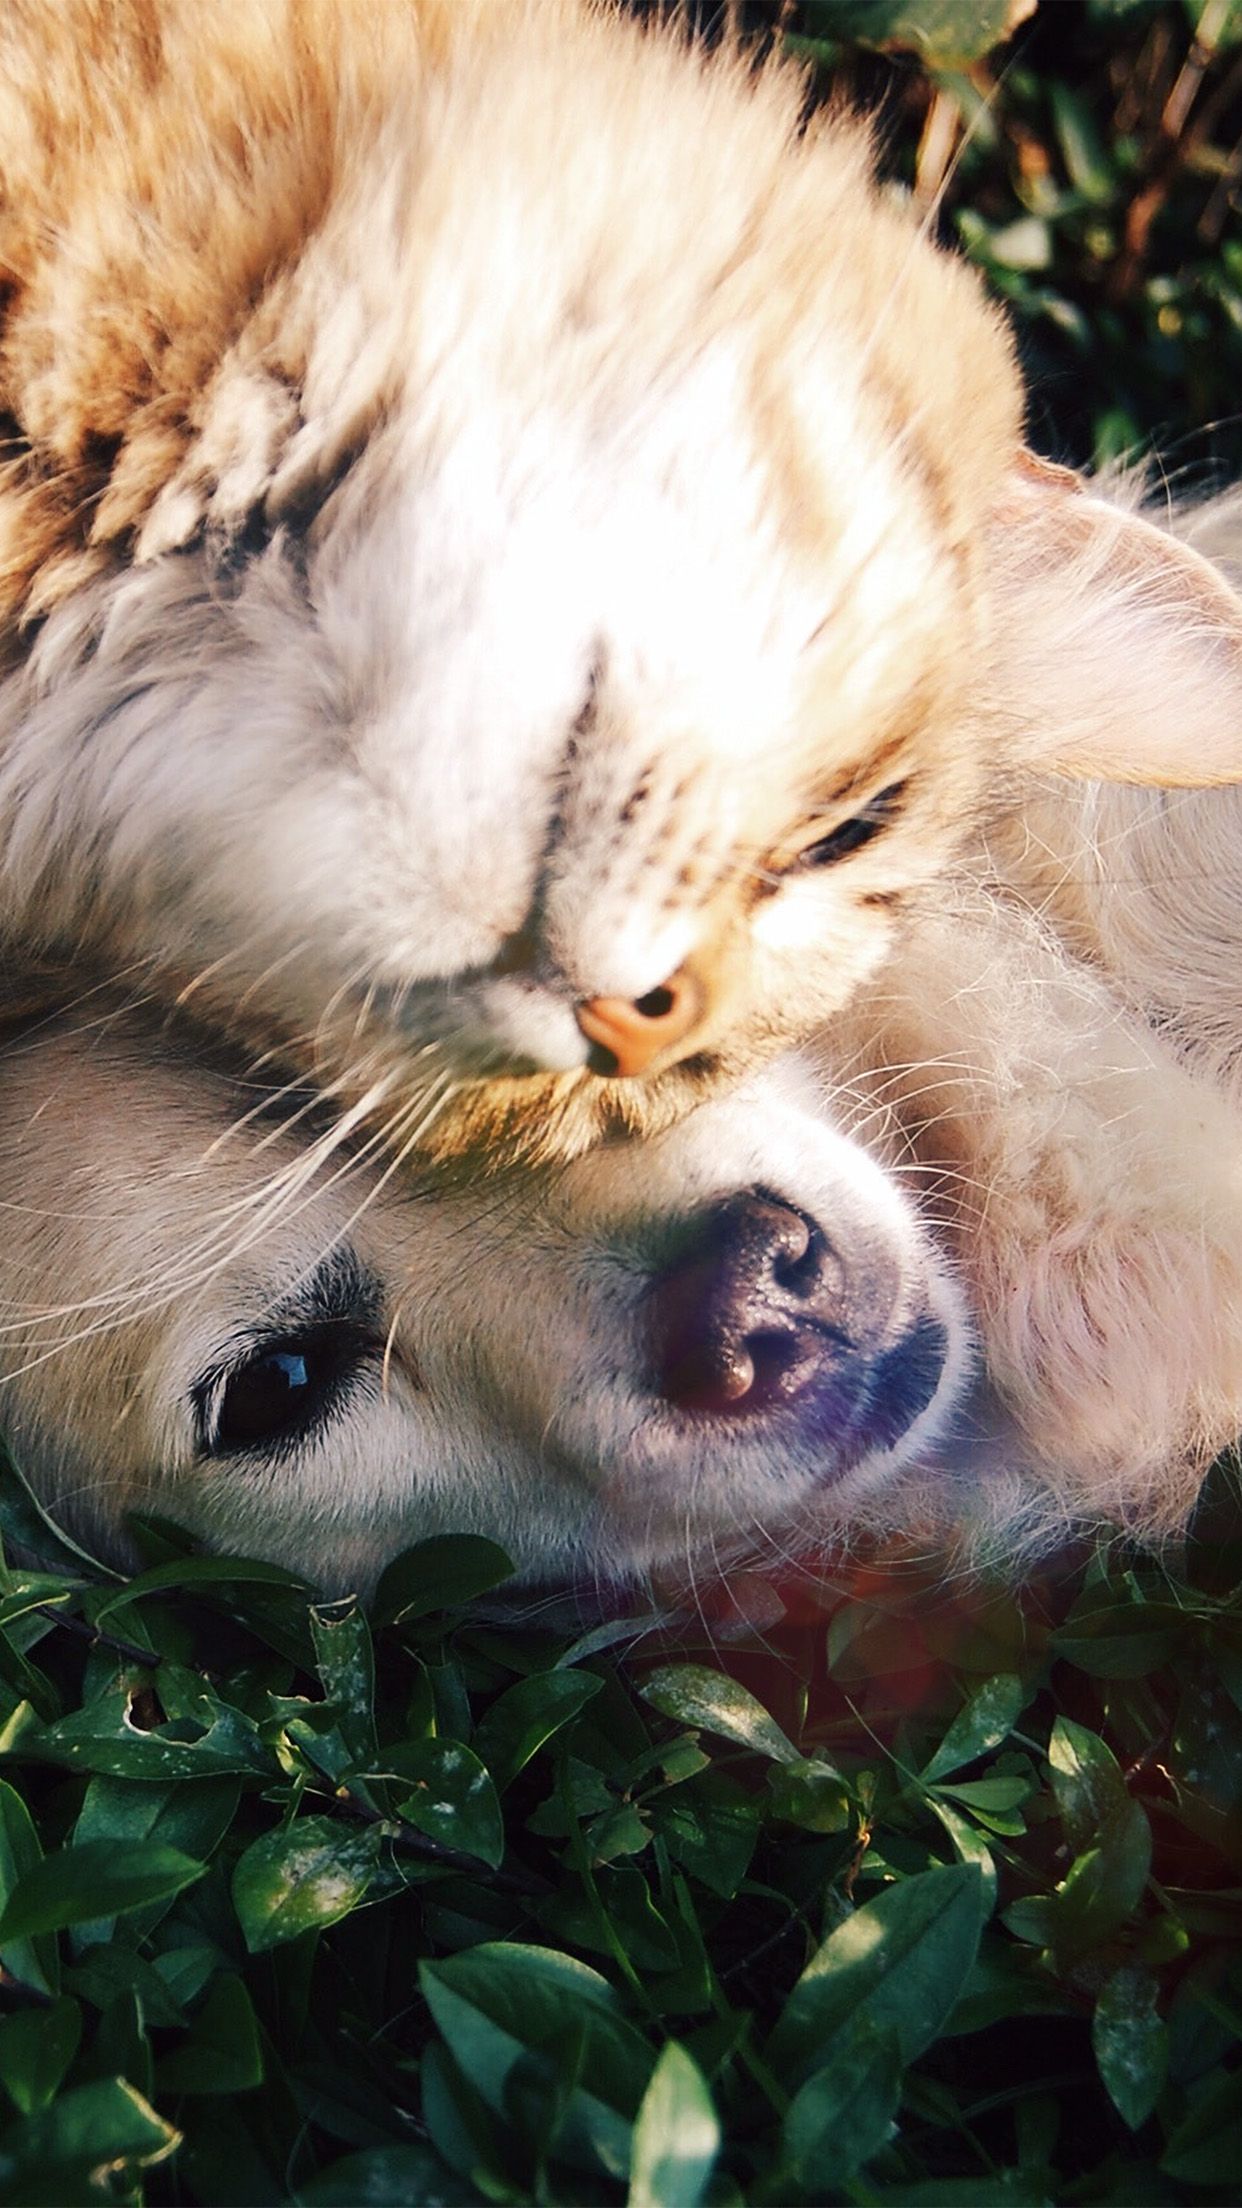 iPhone X wallpaper. cat and dog animal love nature pure flare